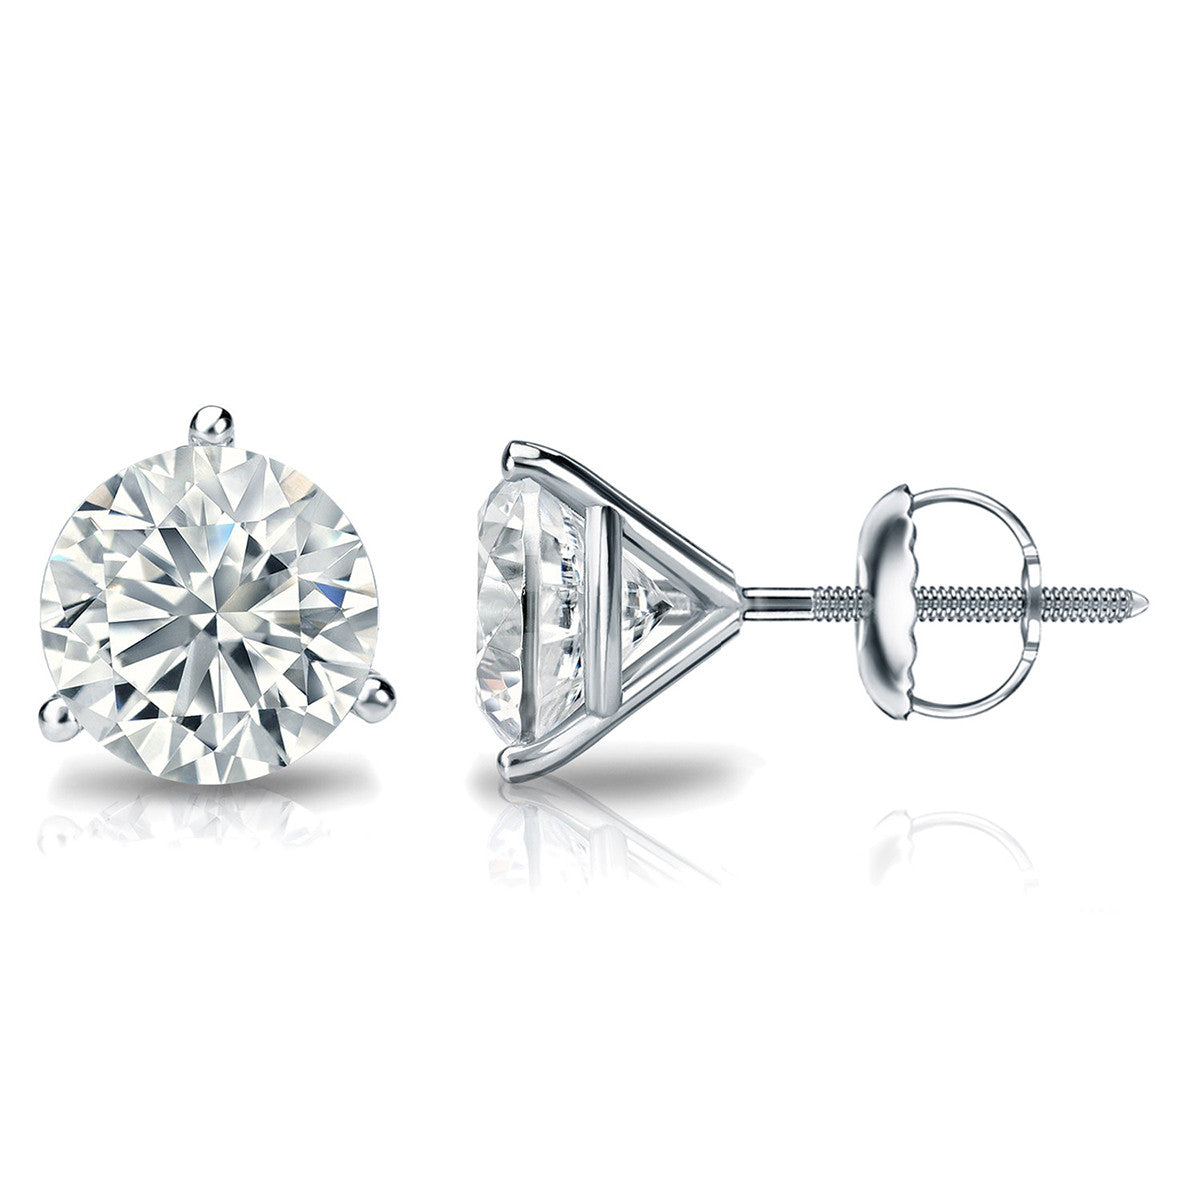 1/3 Carat Round 14K White Gold 3 Prong Martini Set Diamond Solitaire Stud Earrings (Classic Quality)